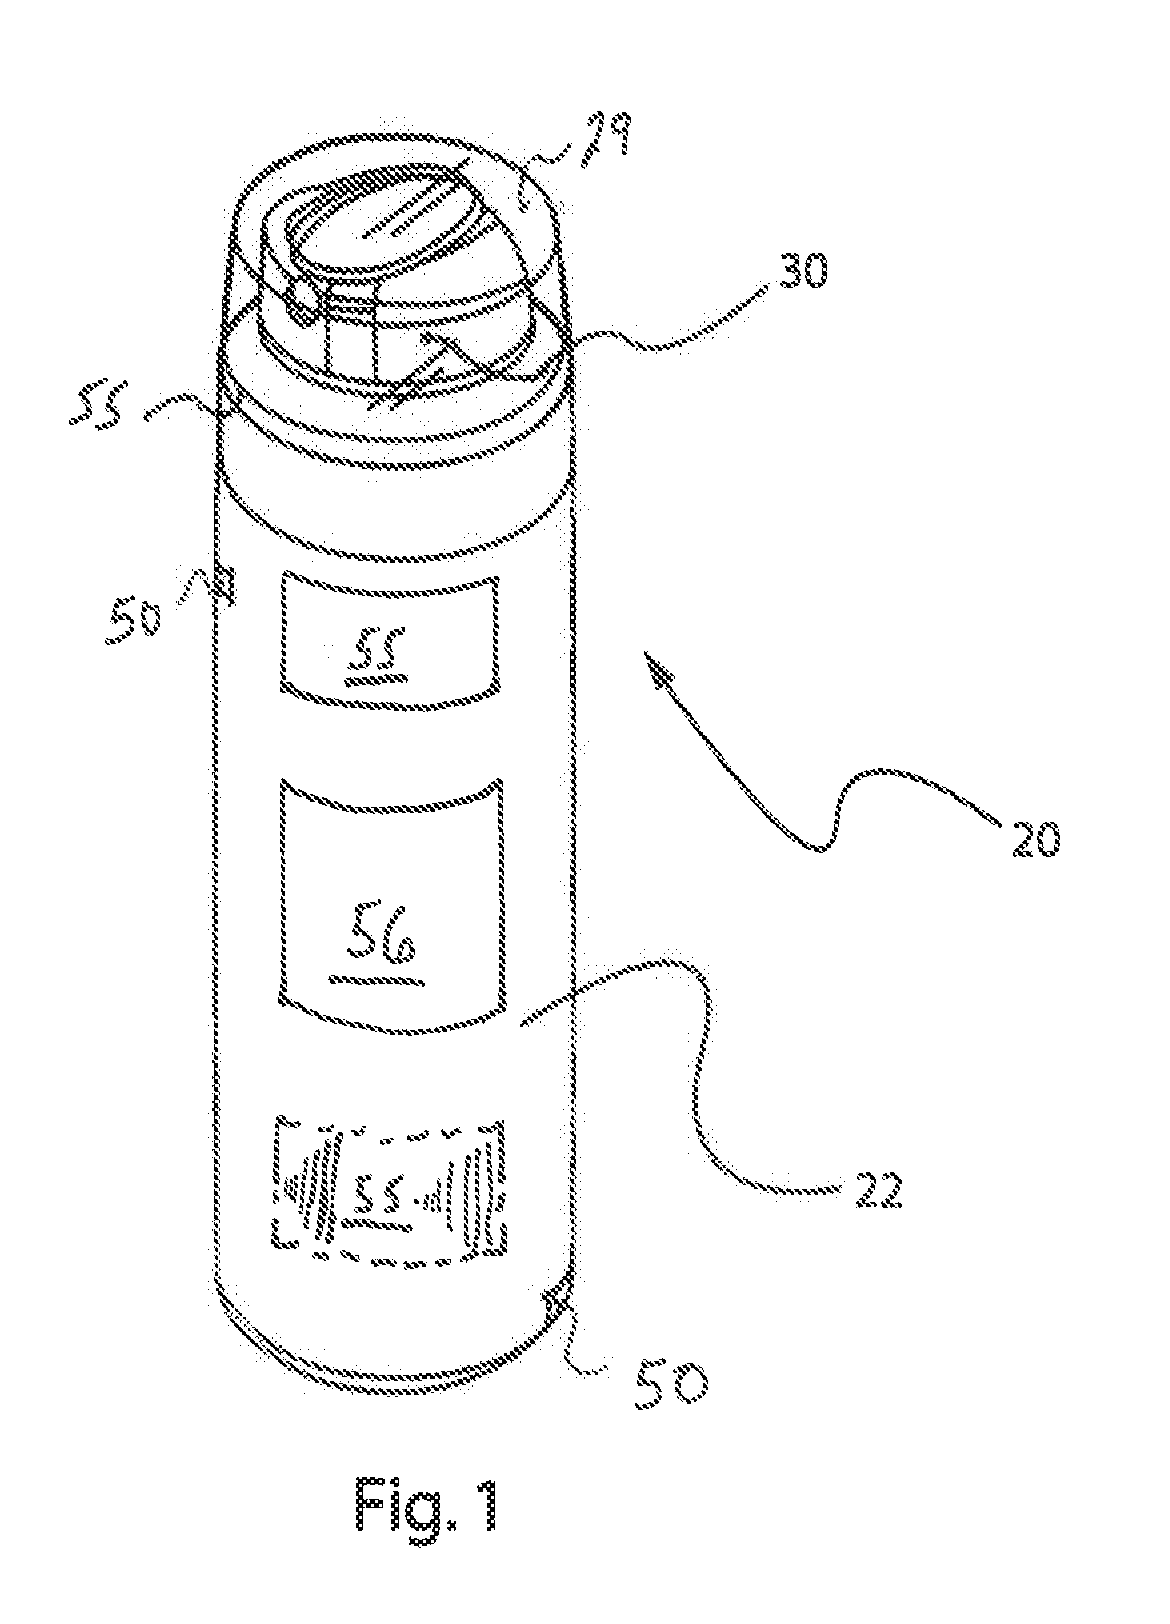 Heating of products in an aerosol dispenser and aerosol dispenser containing such heated products